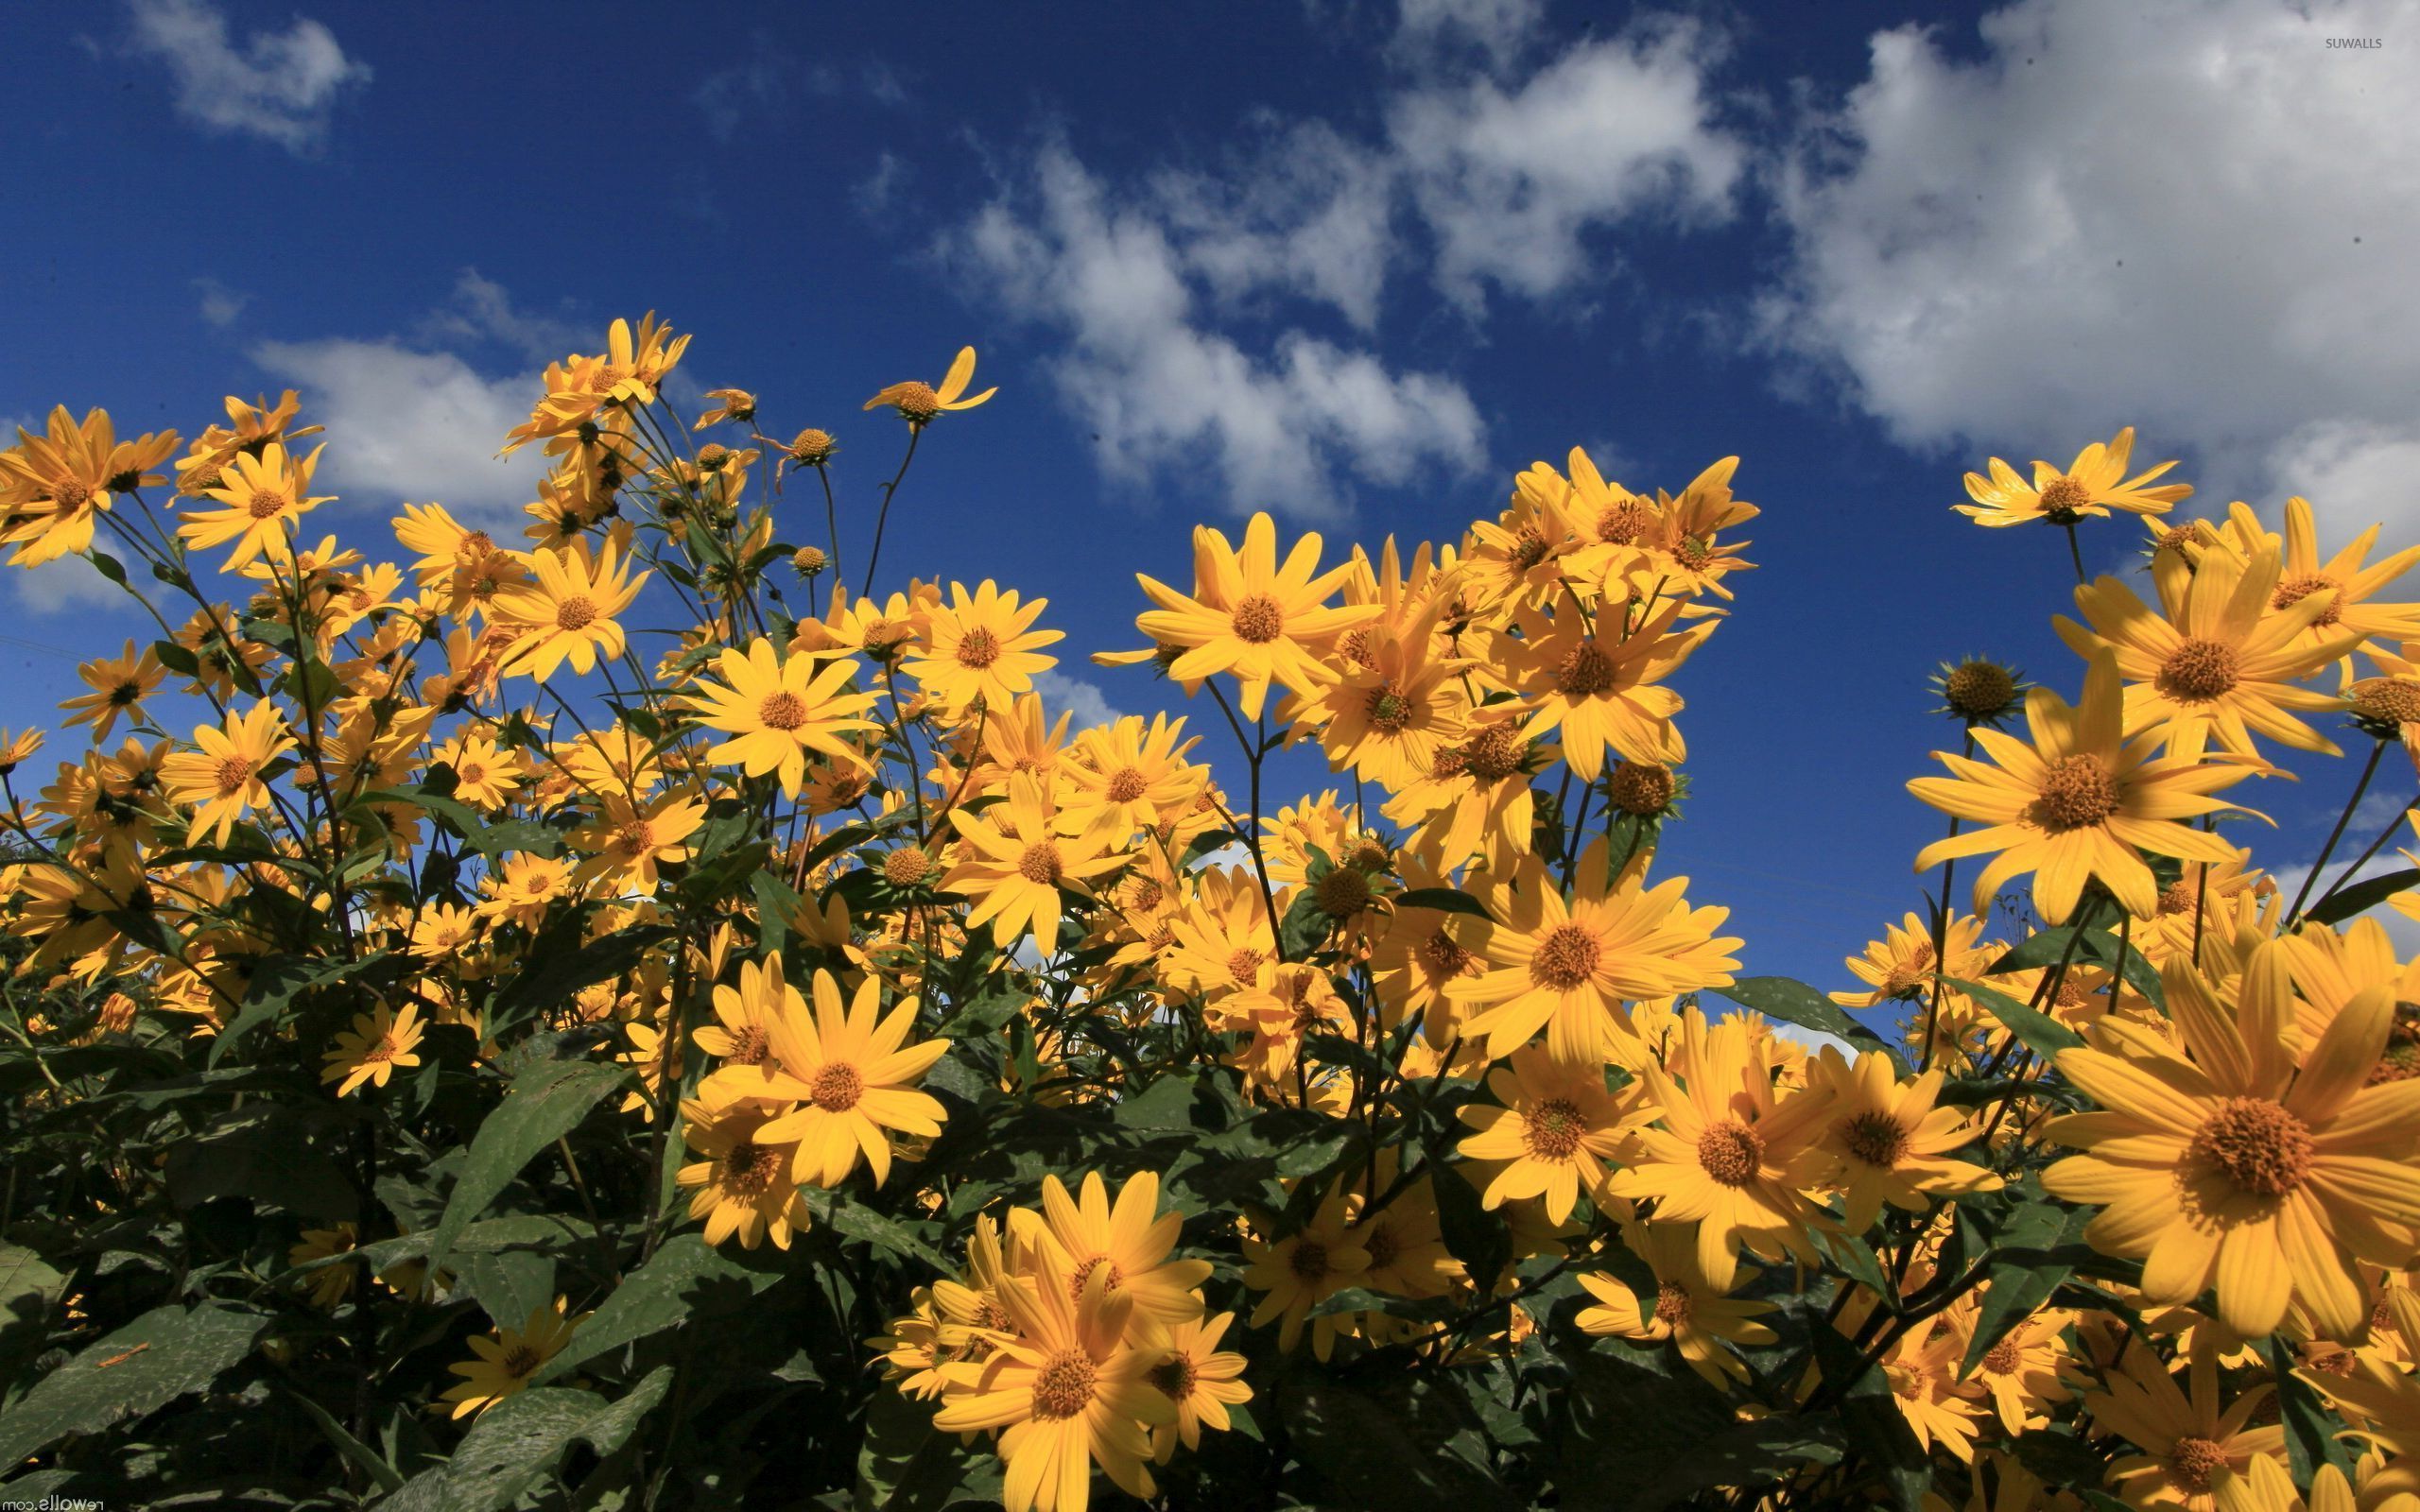 Yellow flowers against a blue sky with white clouds. - Daisy